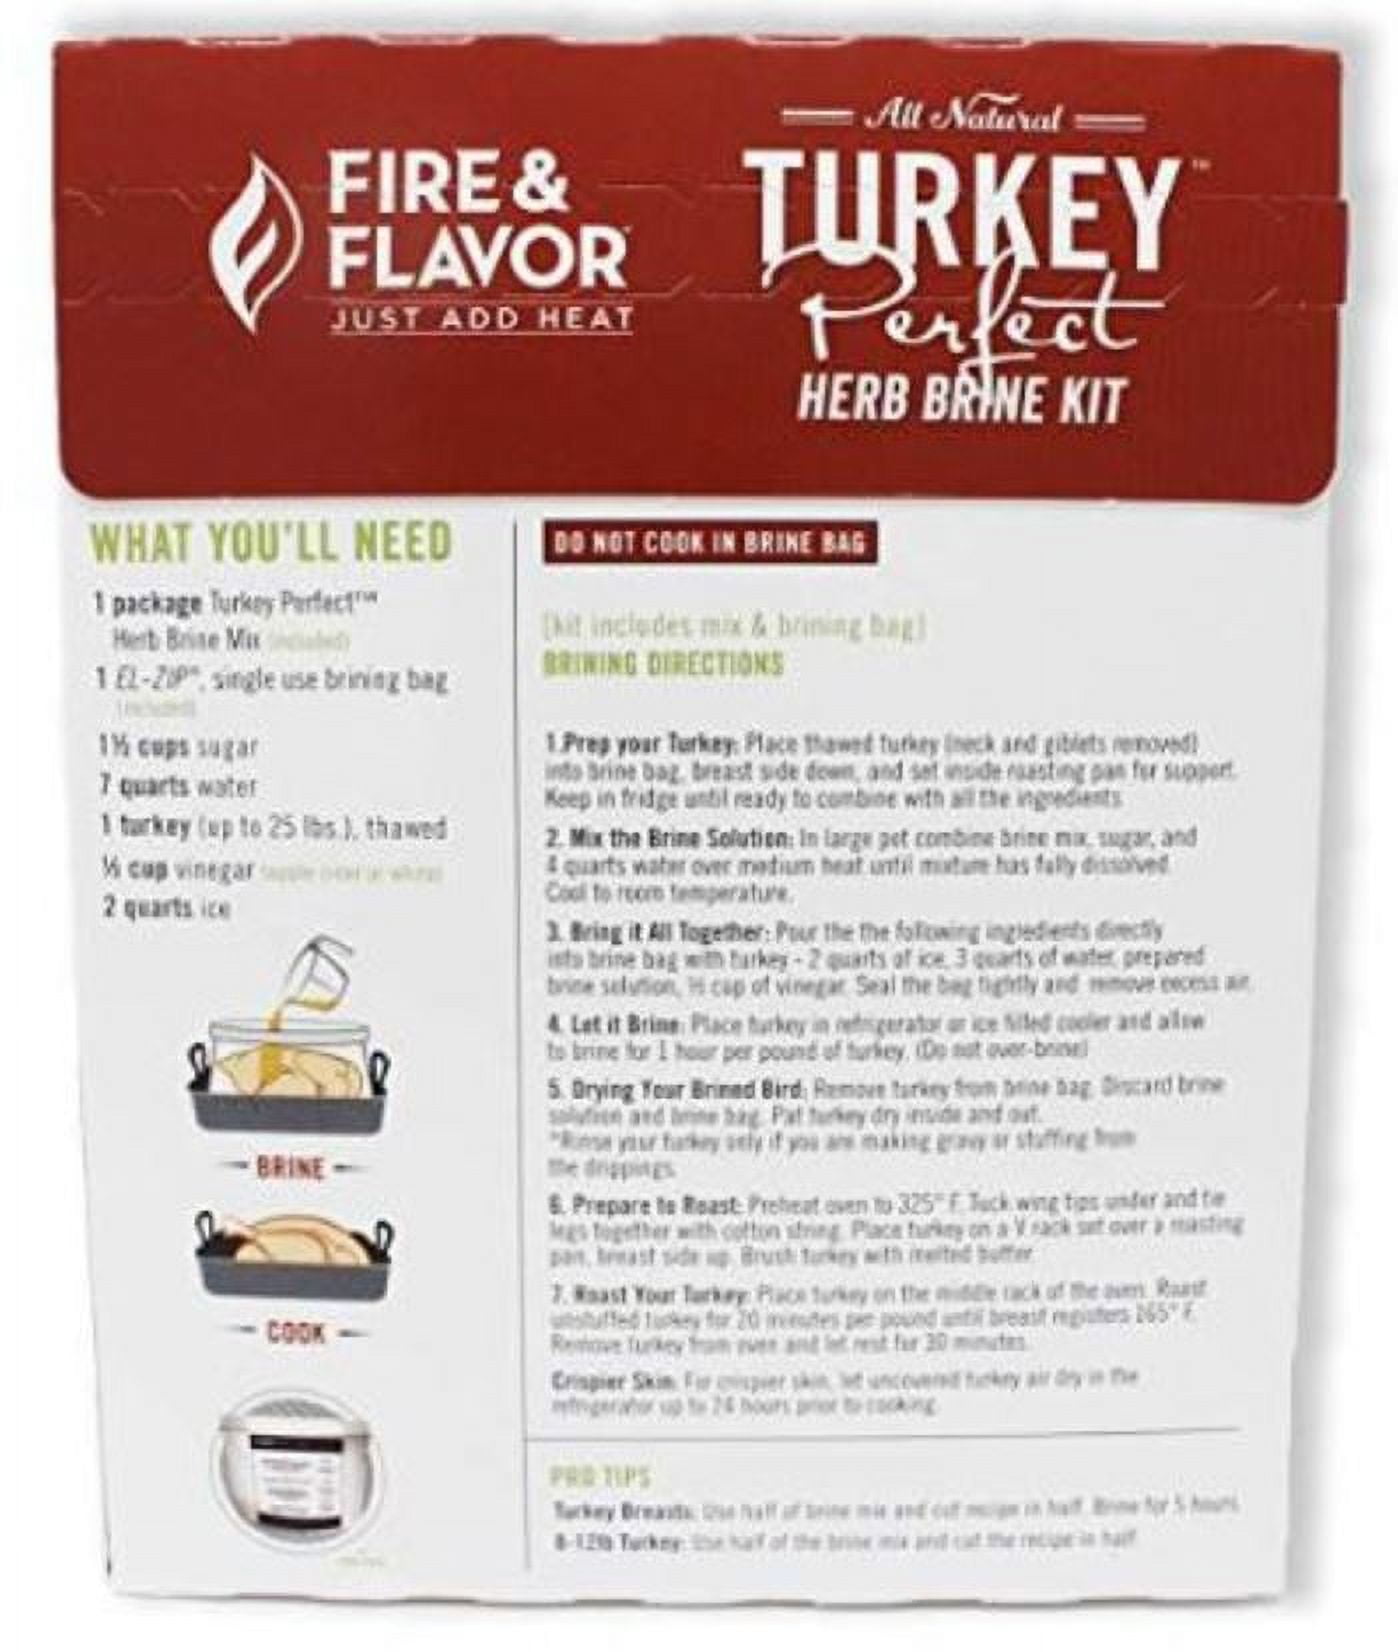 Turkey Perfect by Fire & Flavor All-Natural Lemon Pepper Brine Kit